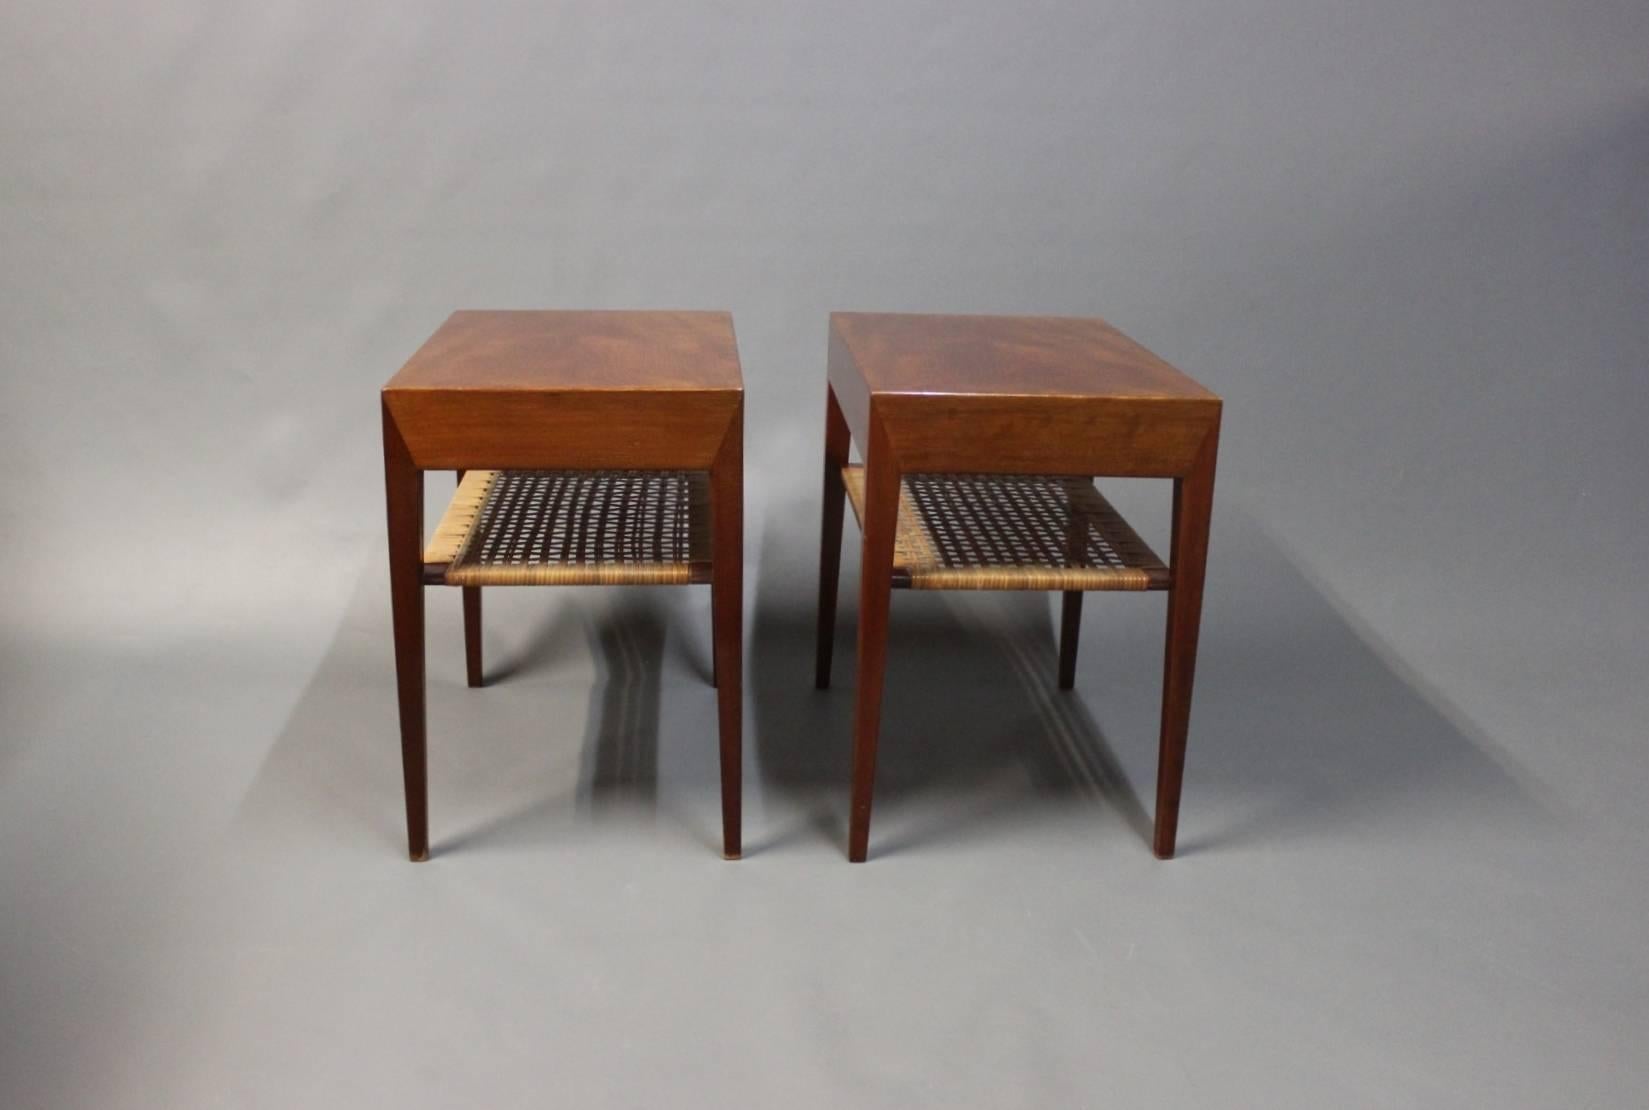 A pair of side tables manufactured by Haslev Furniture Factory and designed by Severin Hansen in the 1960s. The tables are in rosewood and cane.